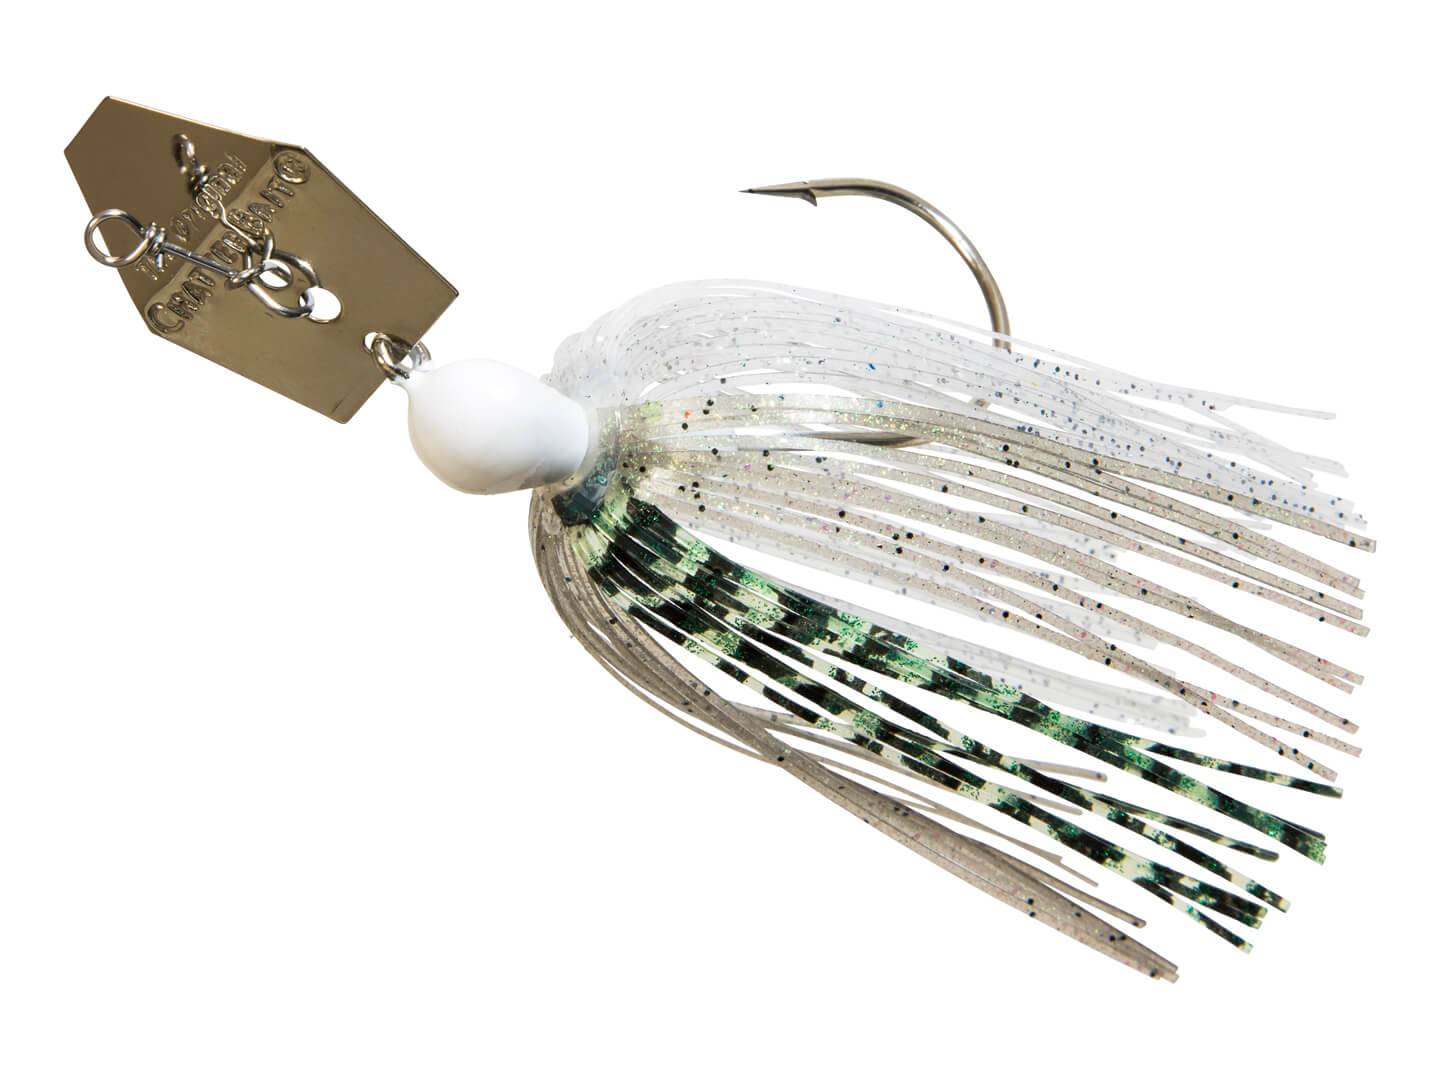 Z-Man Original Chatterbait – Natural Sports - The Fishing Store